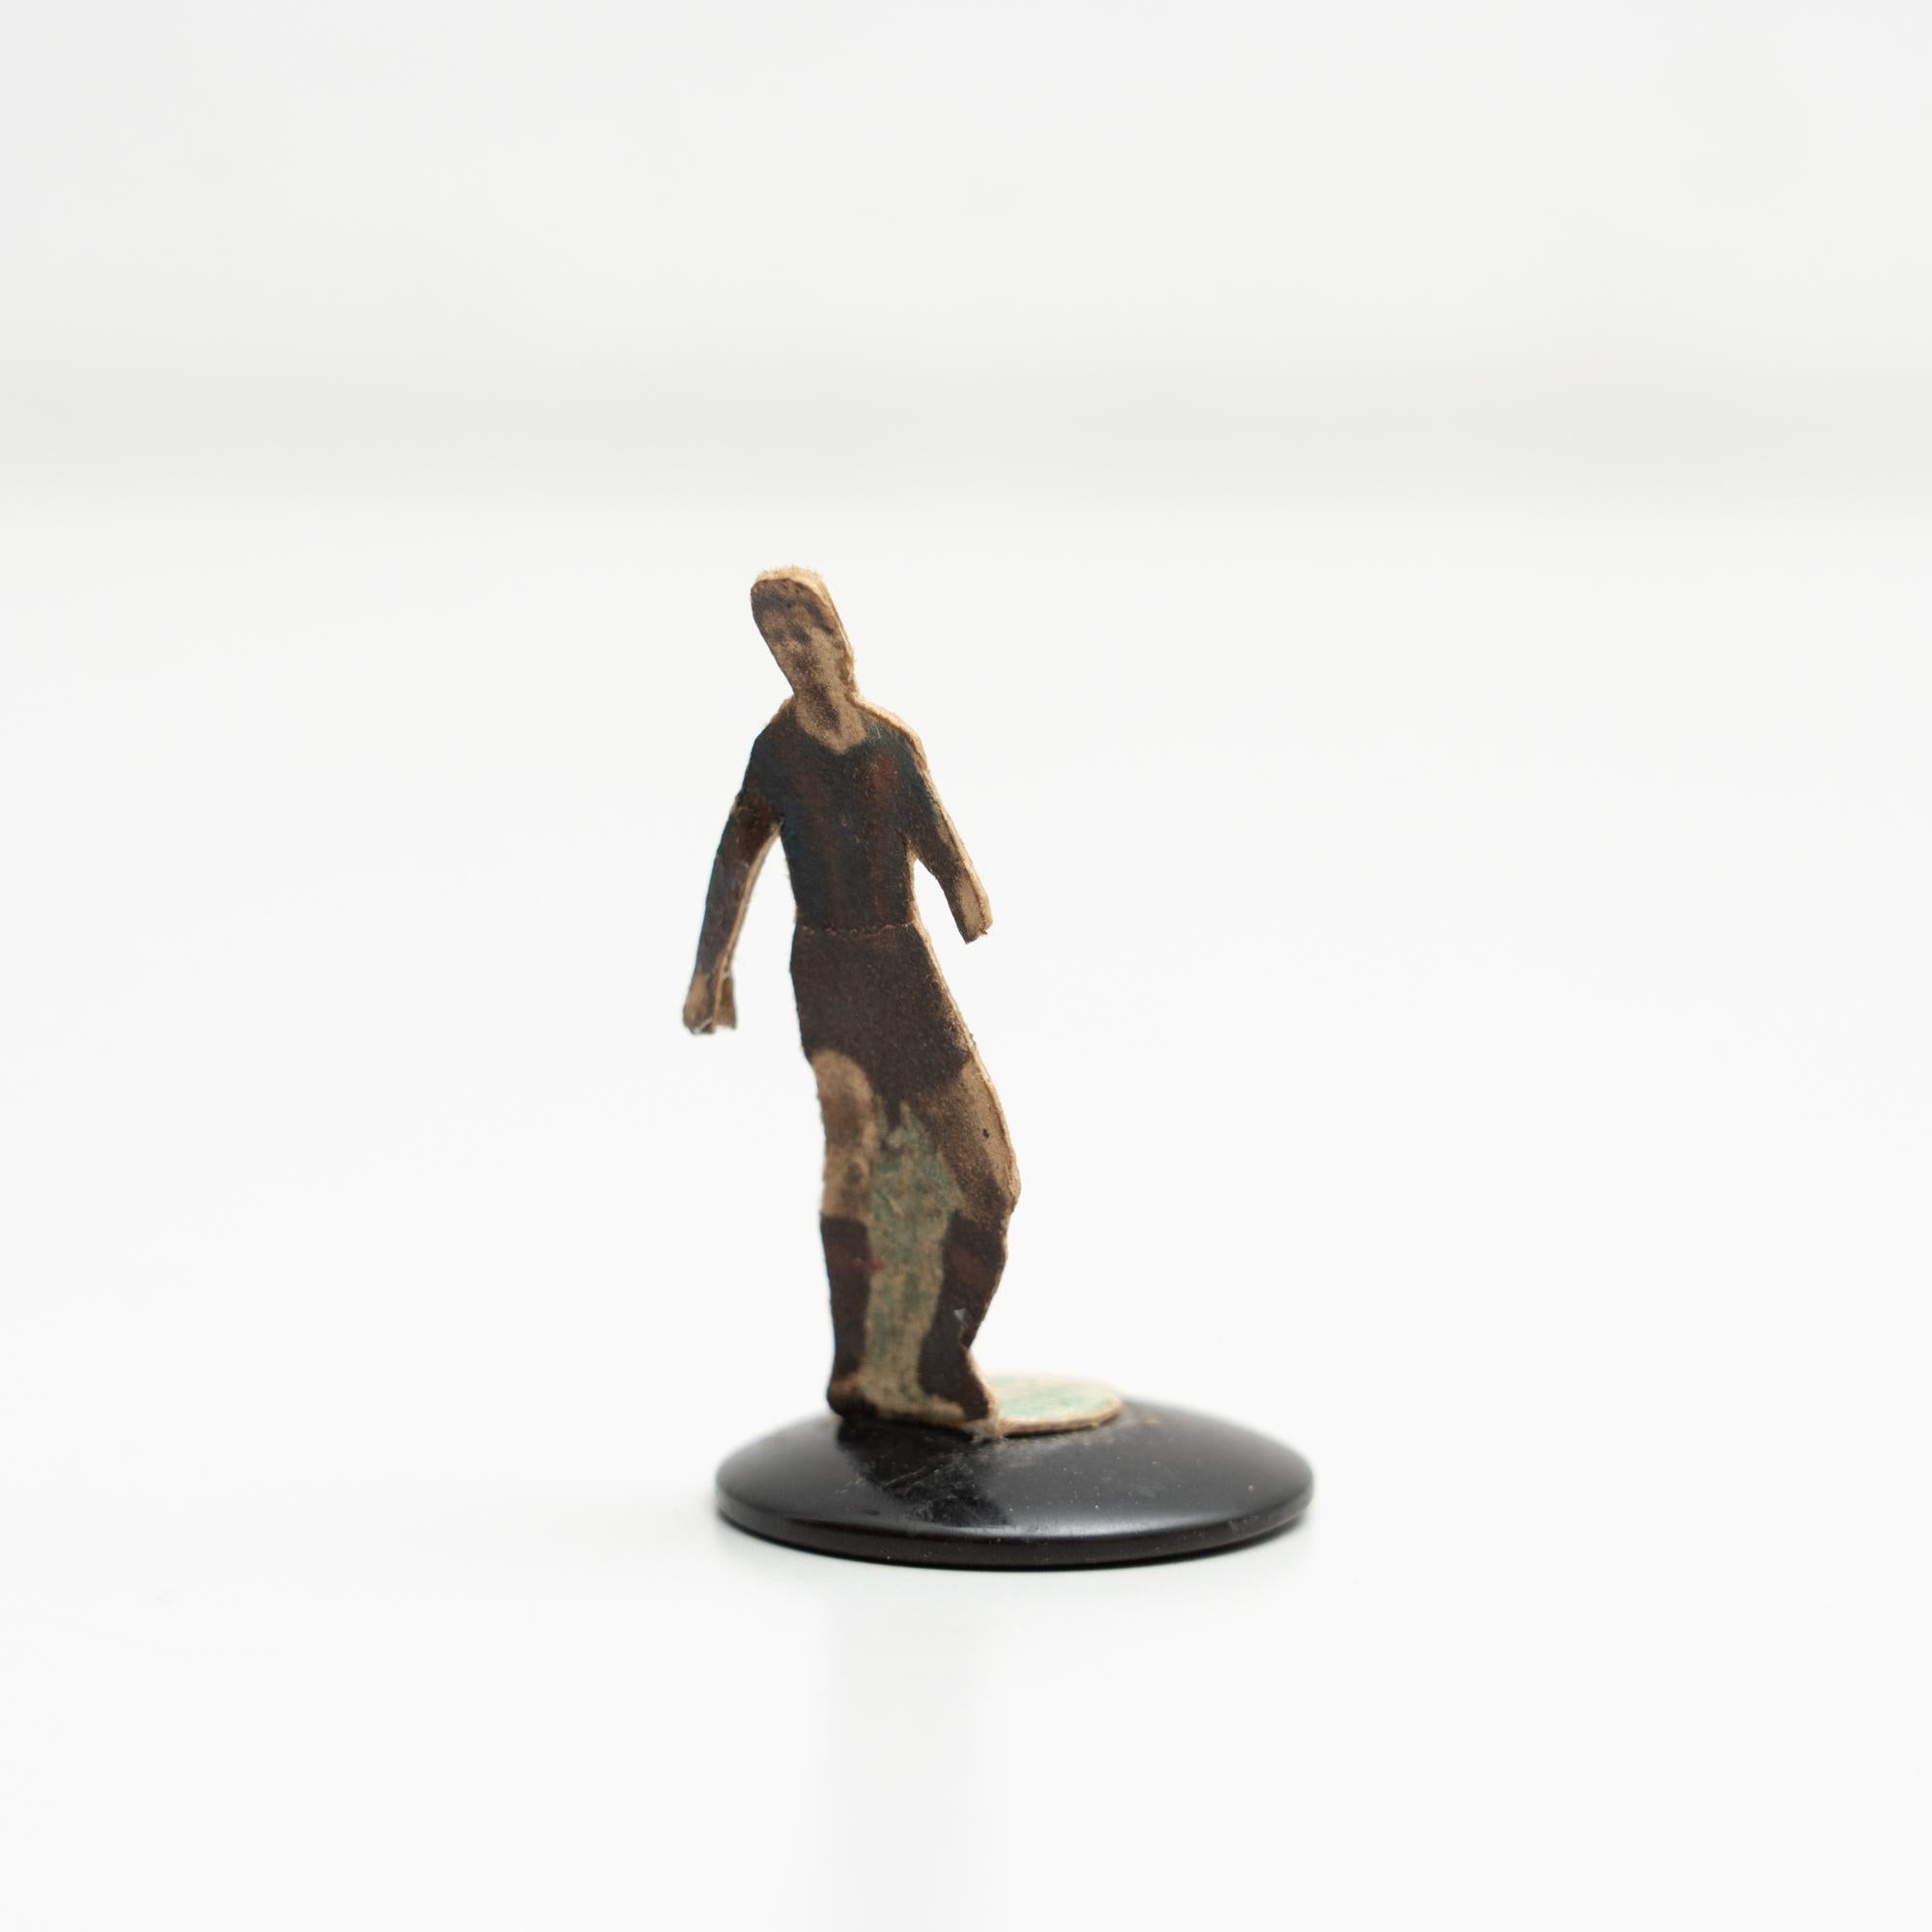 Paper Traditional Antique Button Soccer Game Figure, circa 1950 For Sale